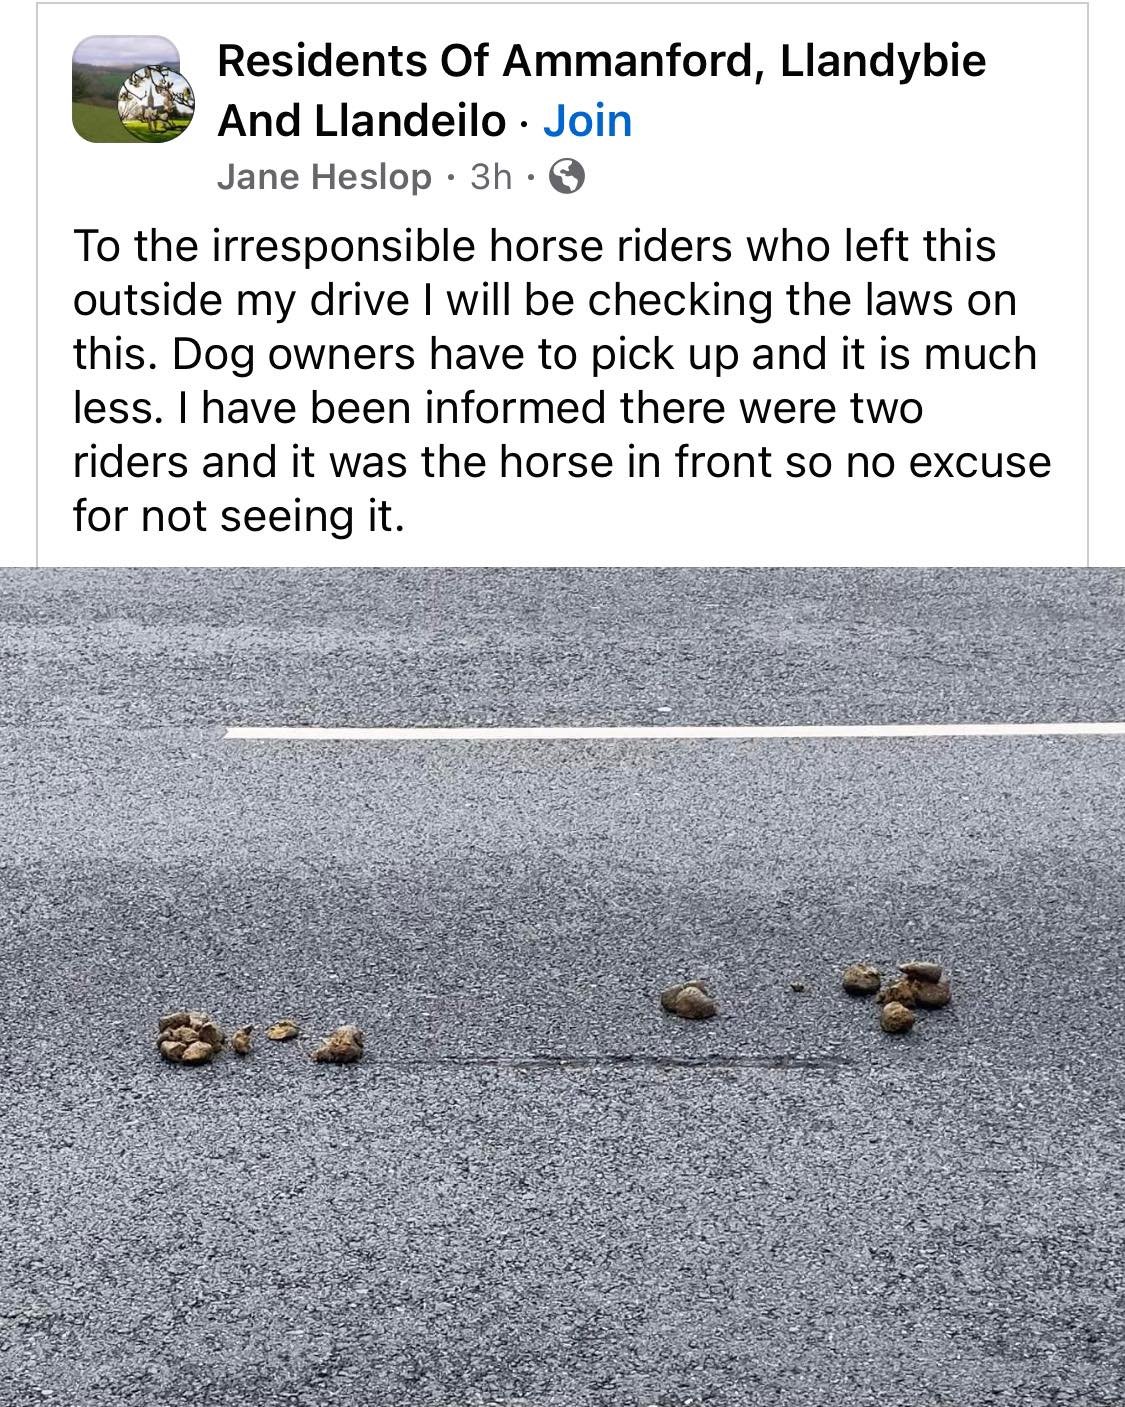 Thought some would find this amusing....

#horse #horsepoo  #citylife  #horselife